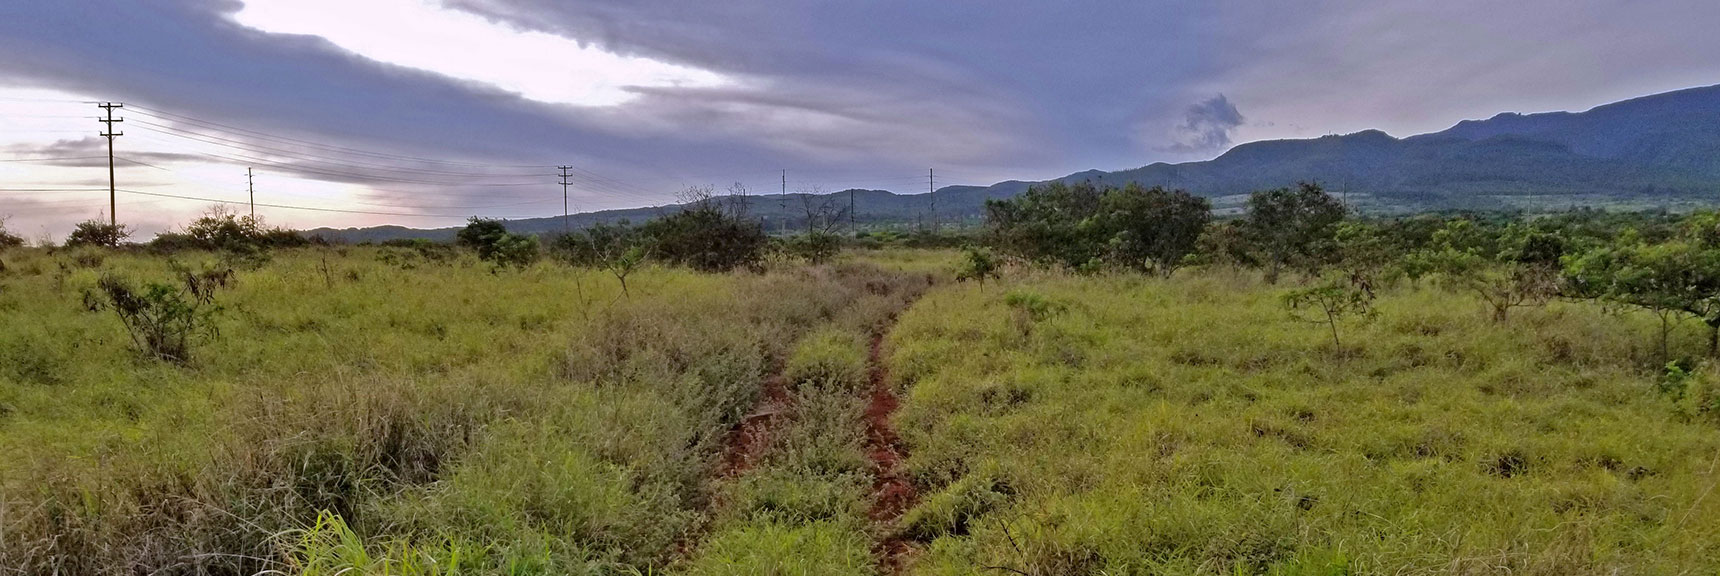 Some of the Roads in the System Have Not Been Used Recently | Hidden Hills and Jungle Above Kahana in West Maui, Hawaii